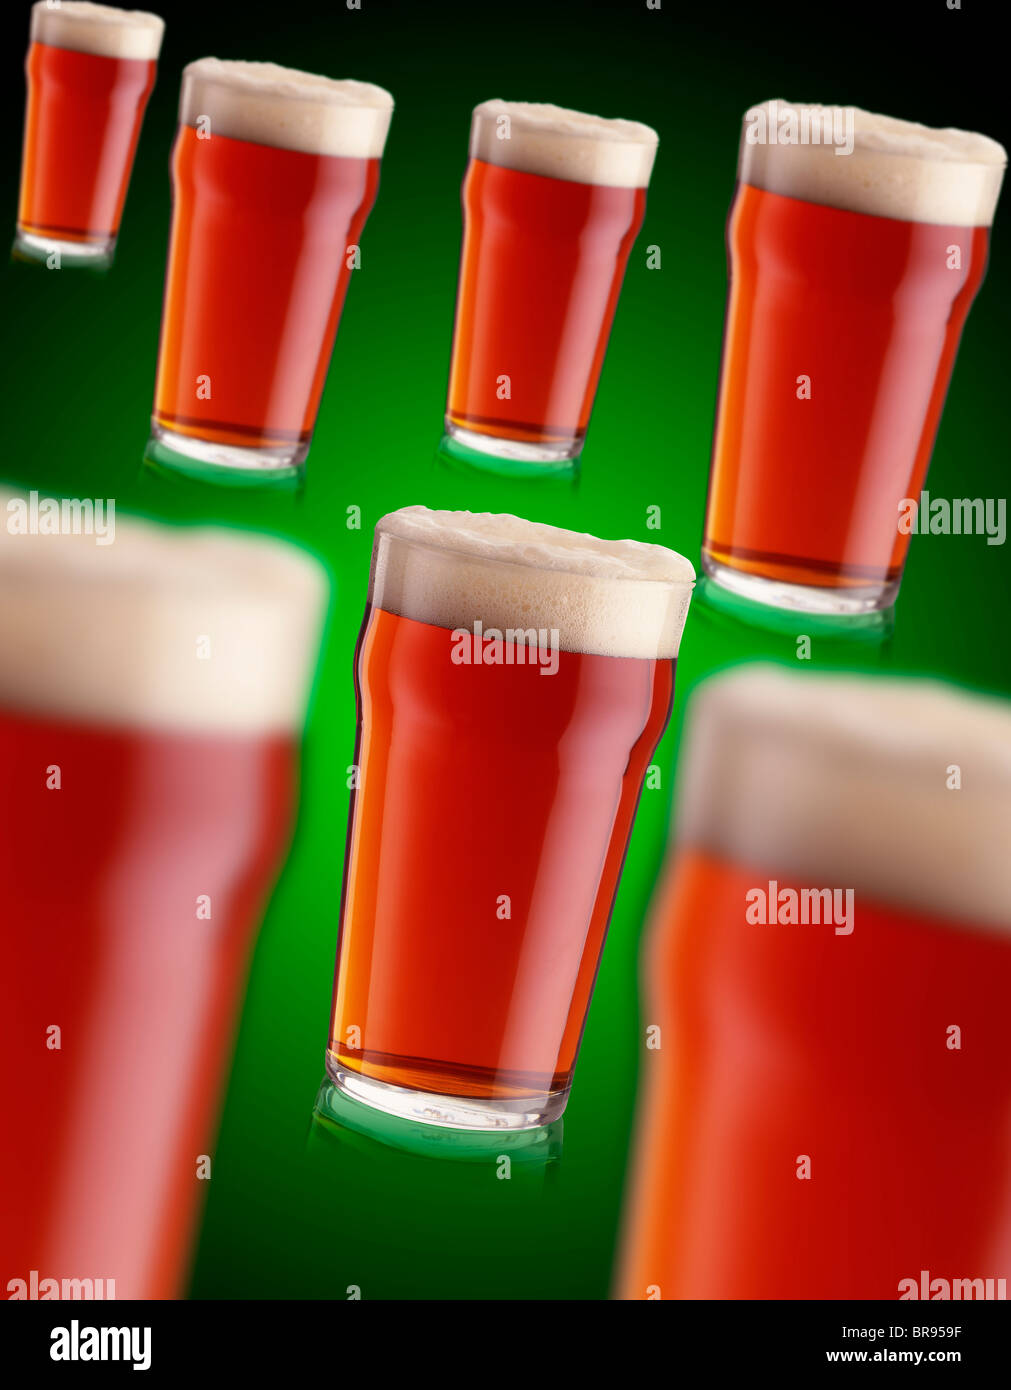 7 pints of bitter real ale on a green background Stock Photo